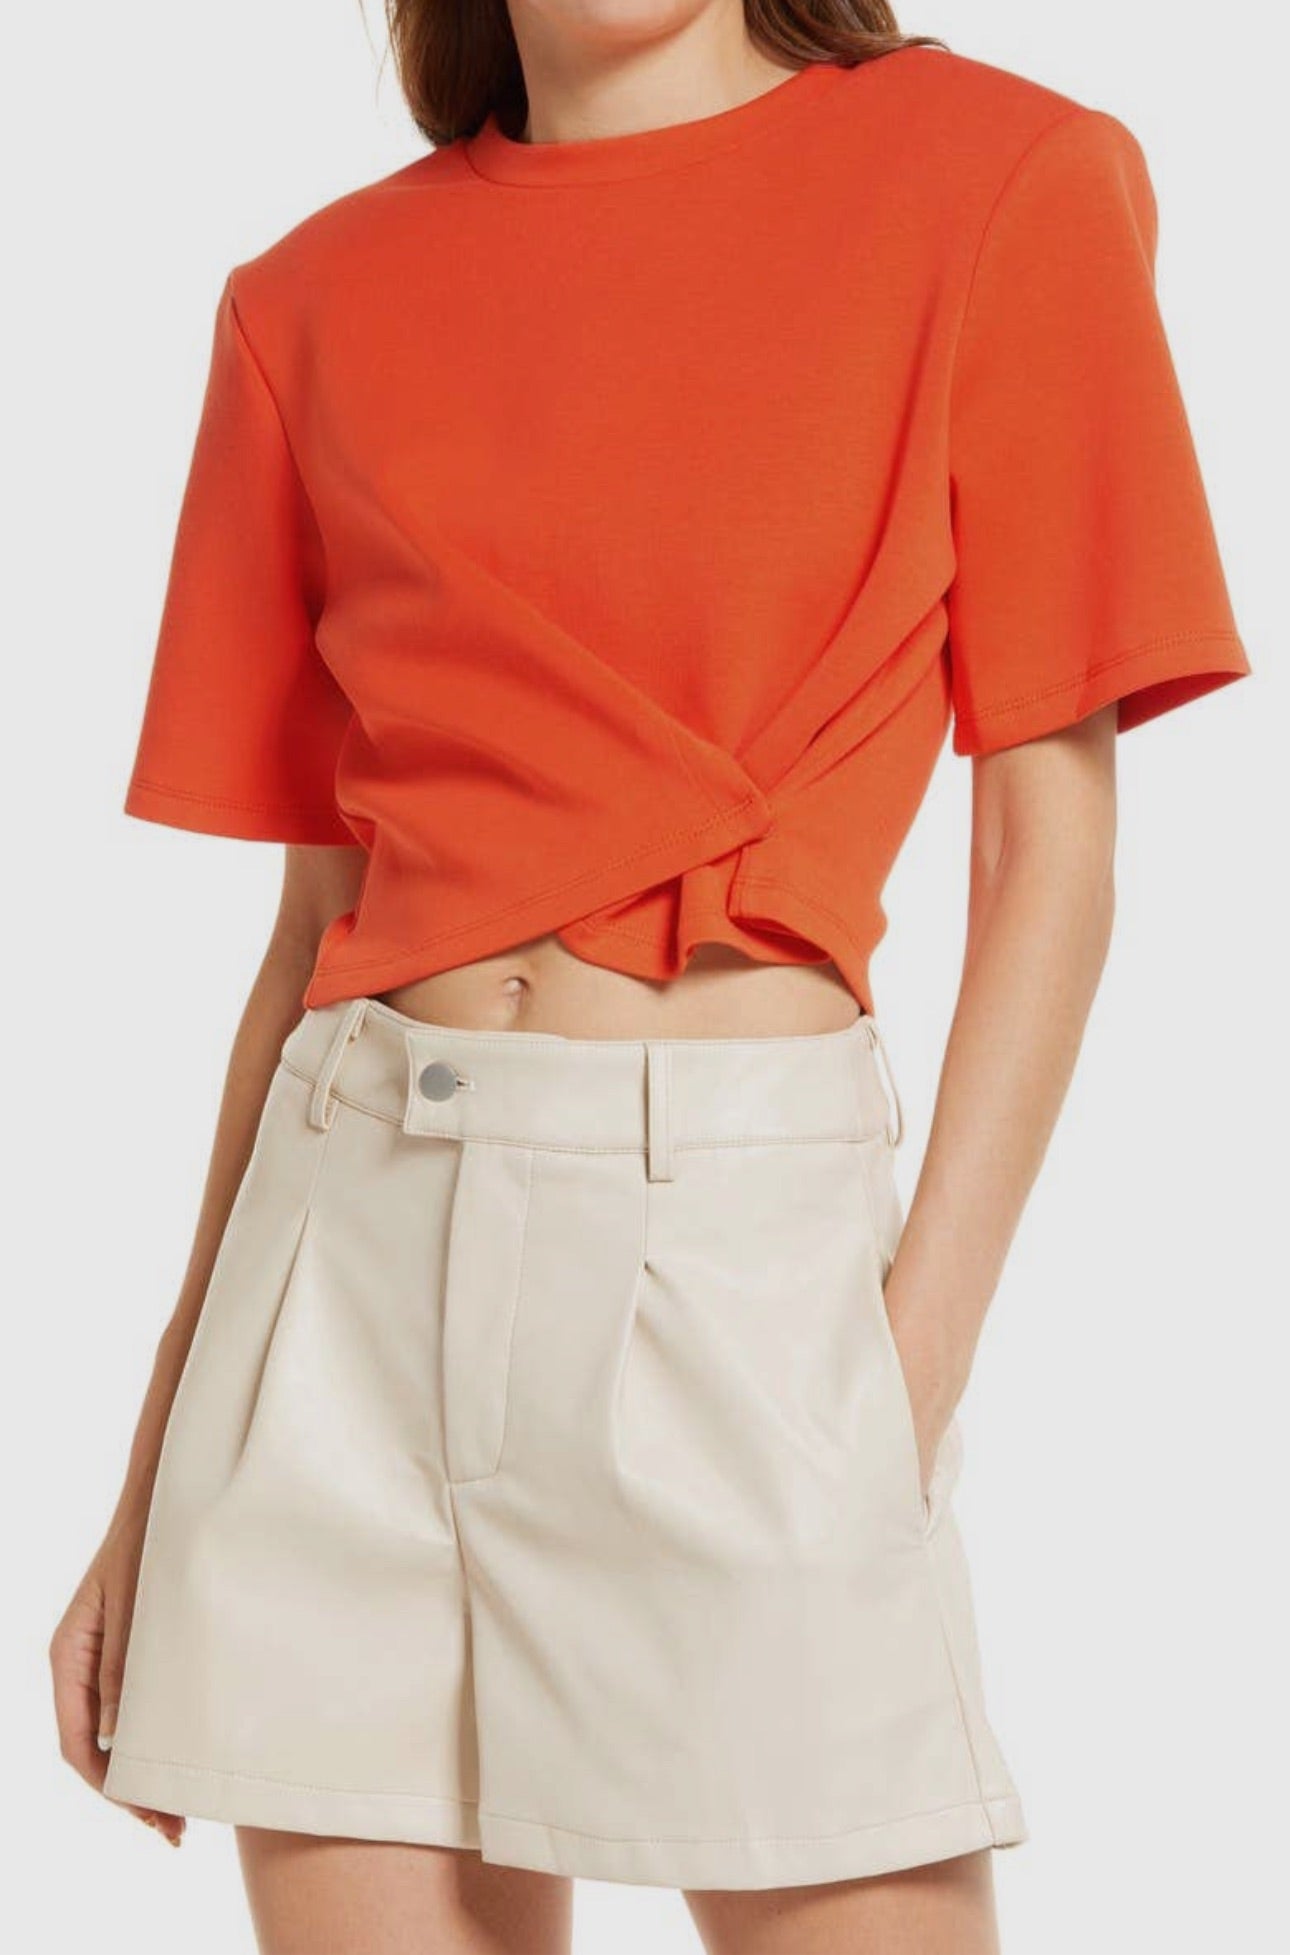 Crop and tuck top